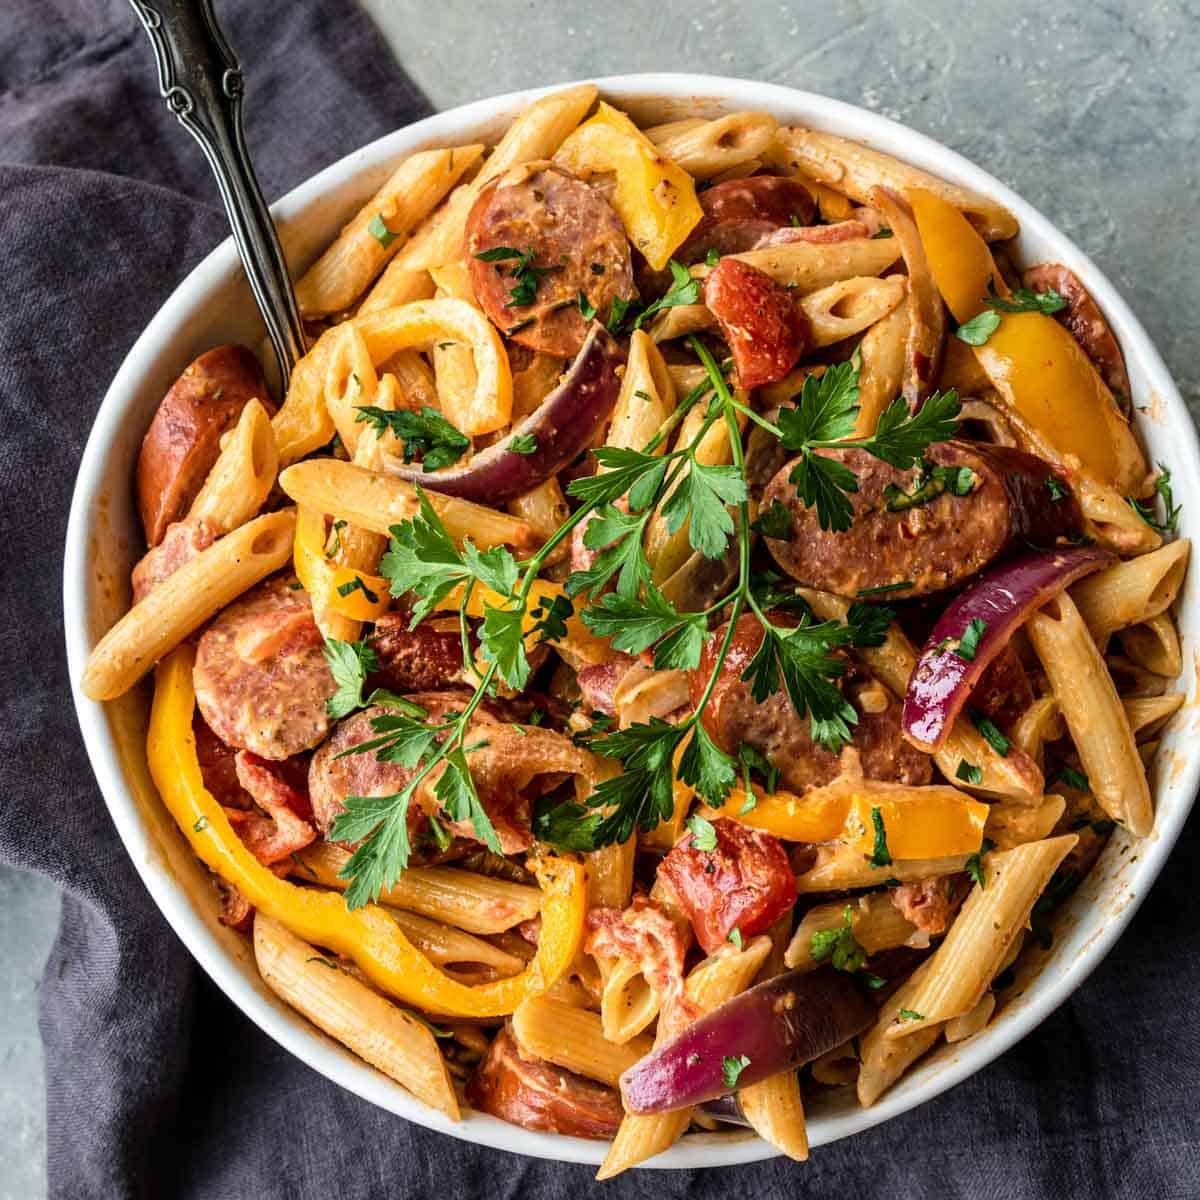 Cajun Pasta in a large bowl garnished with parsley